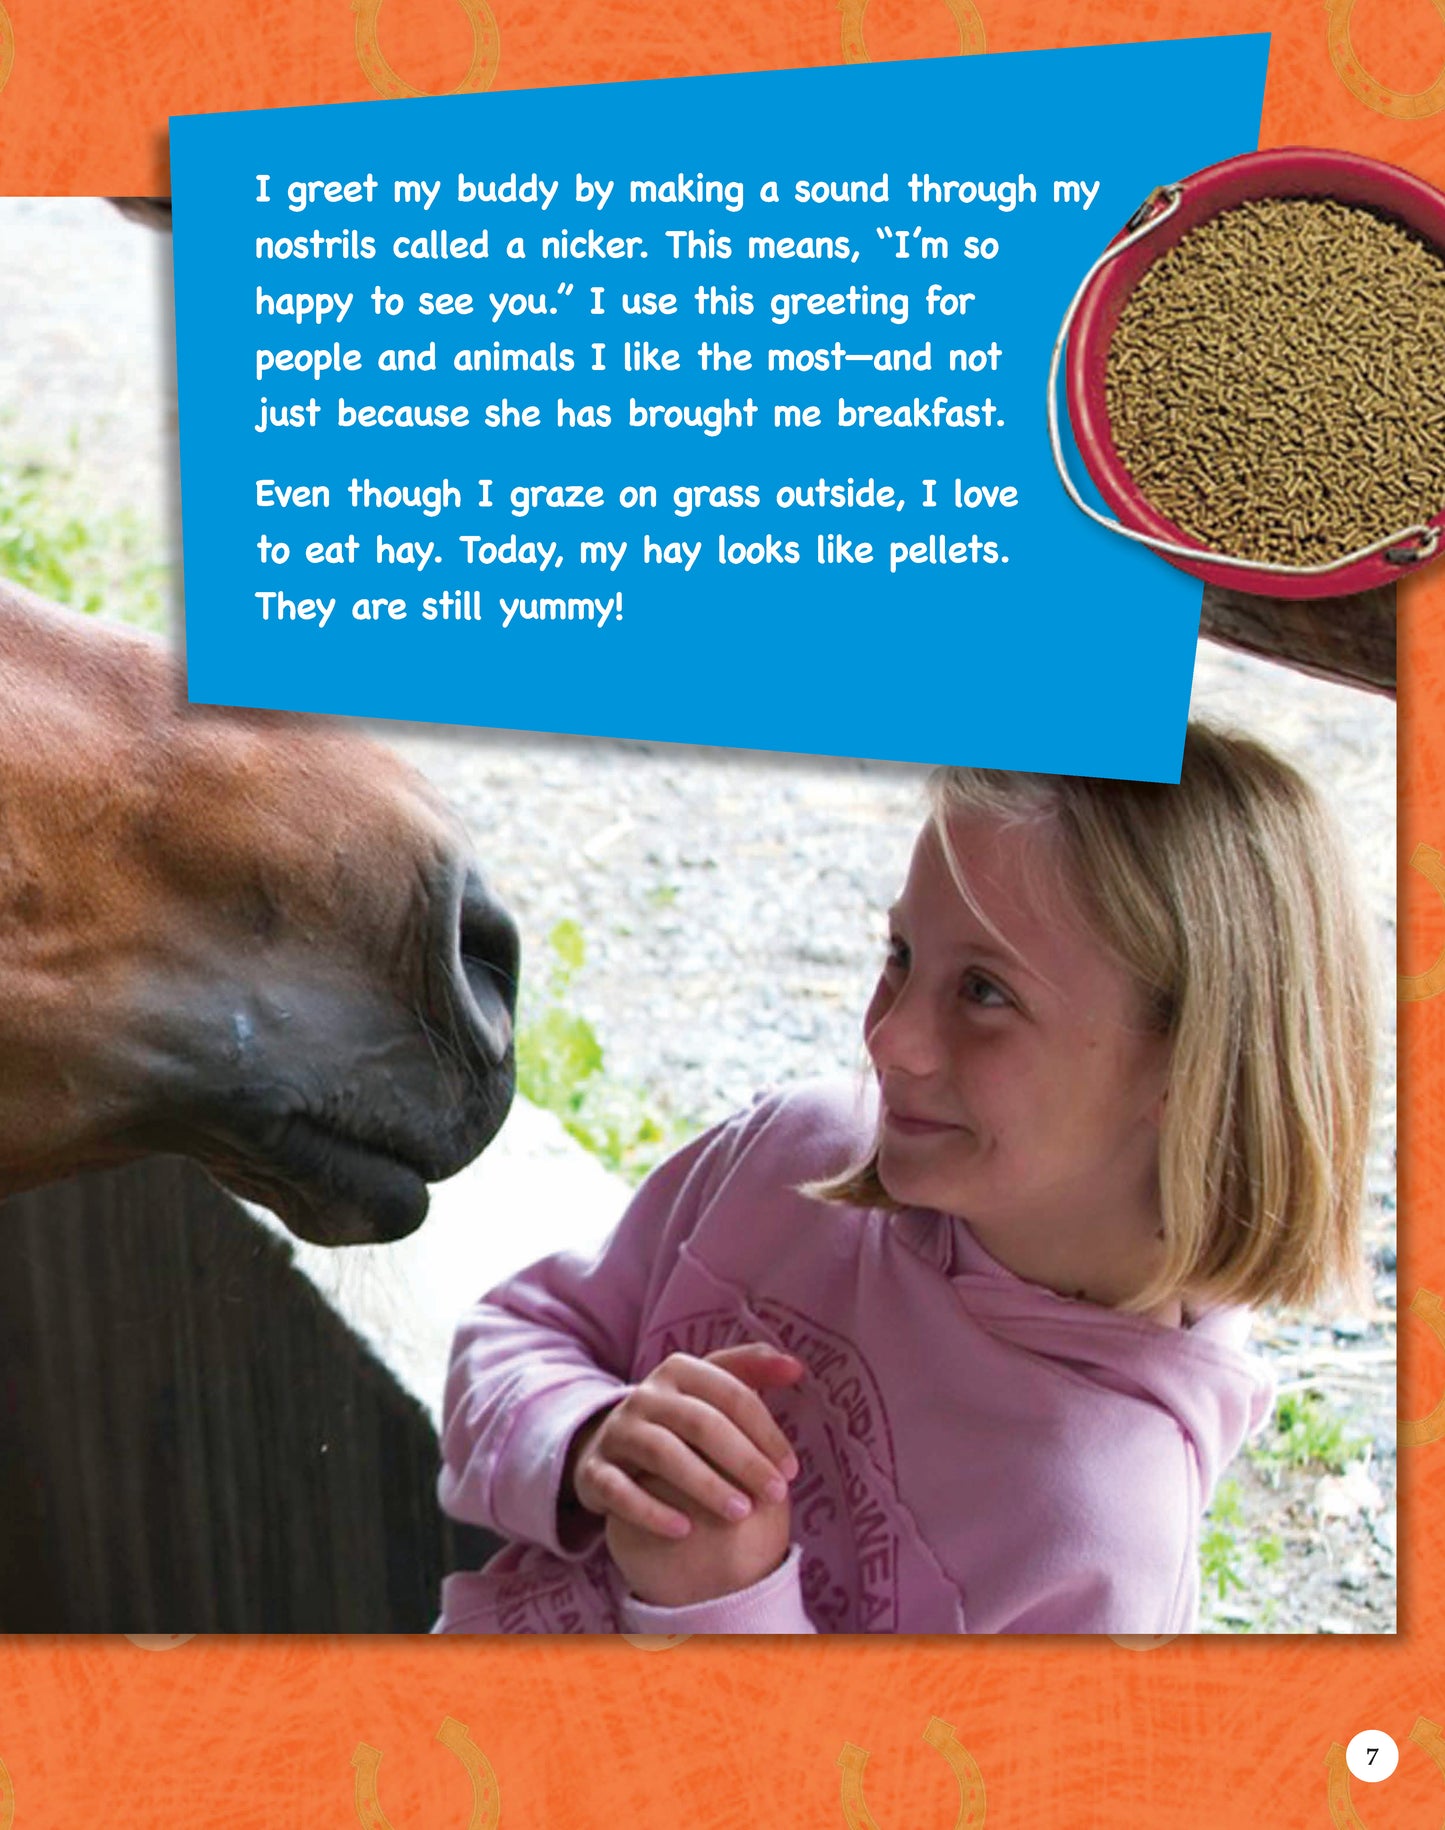 If Animals Could Talk: Horses